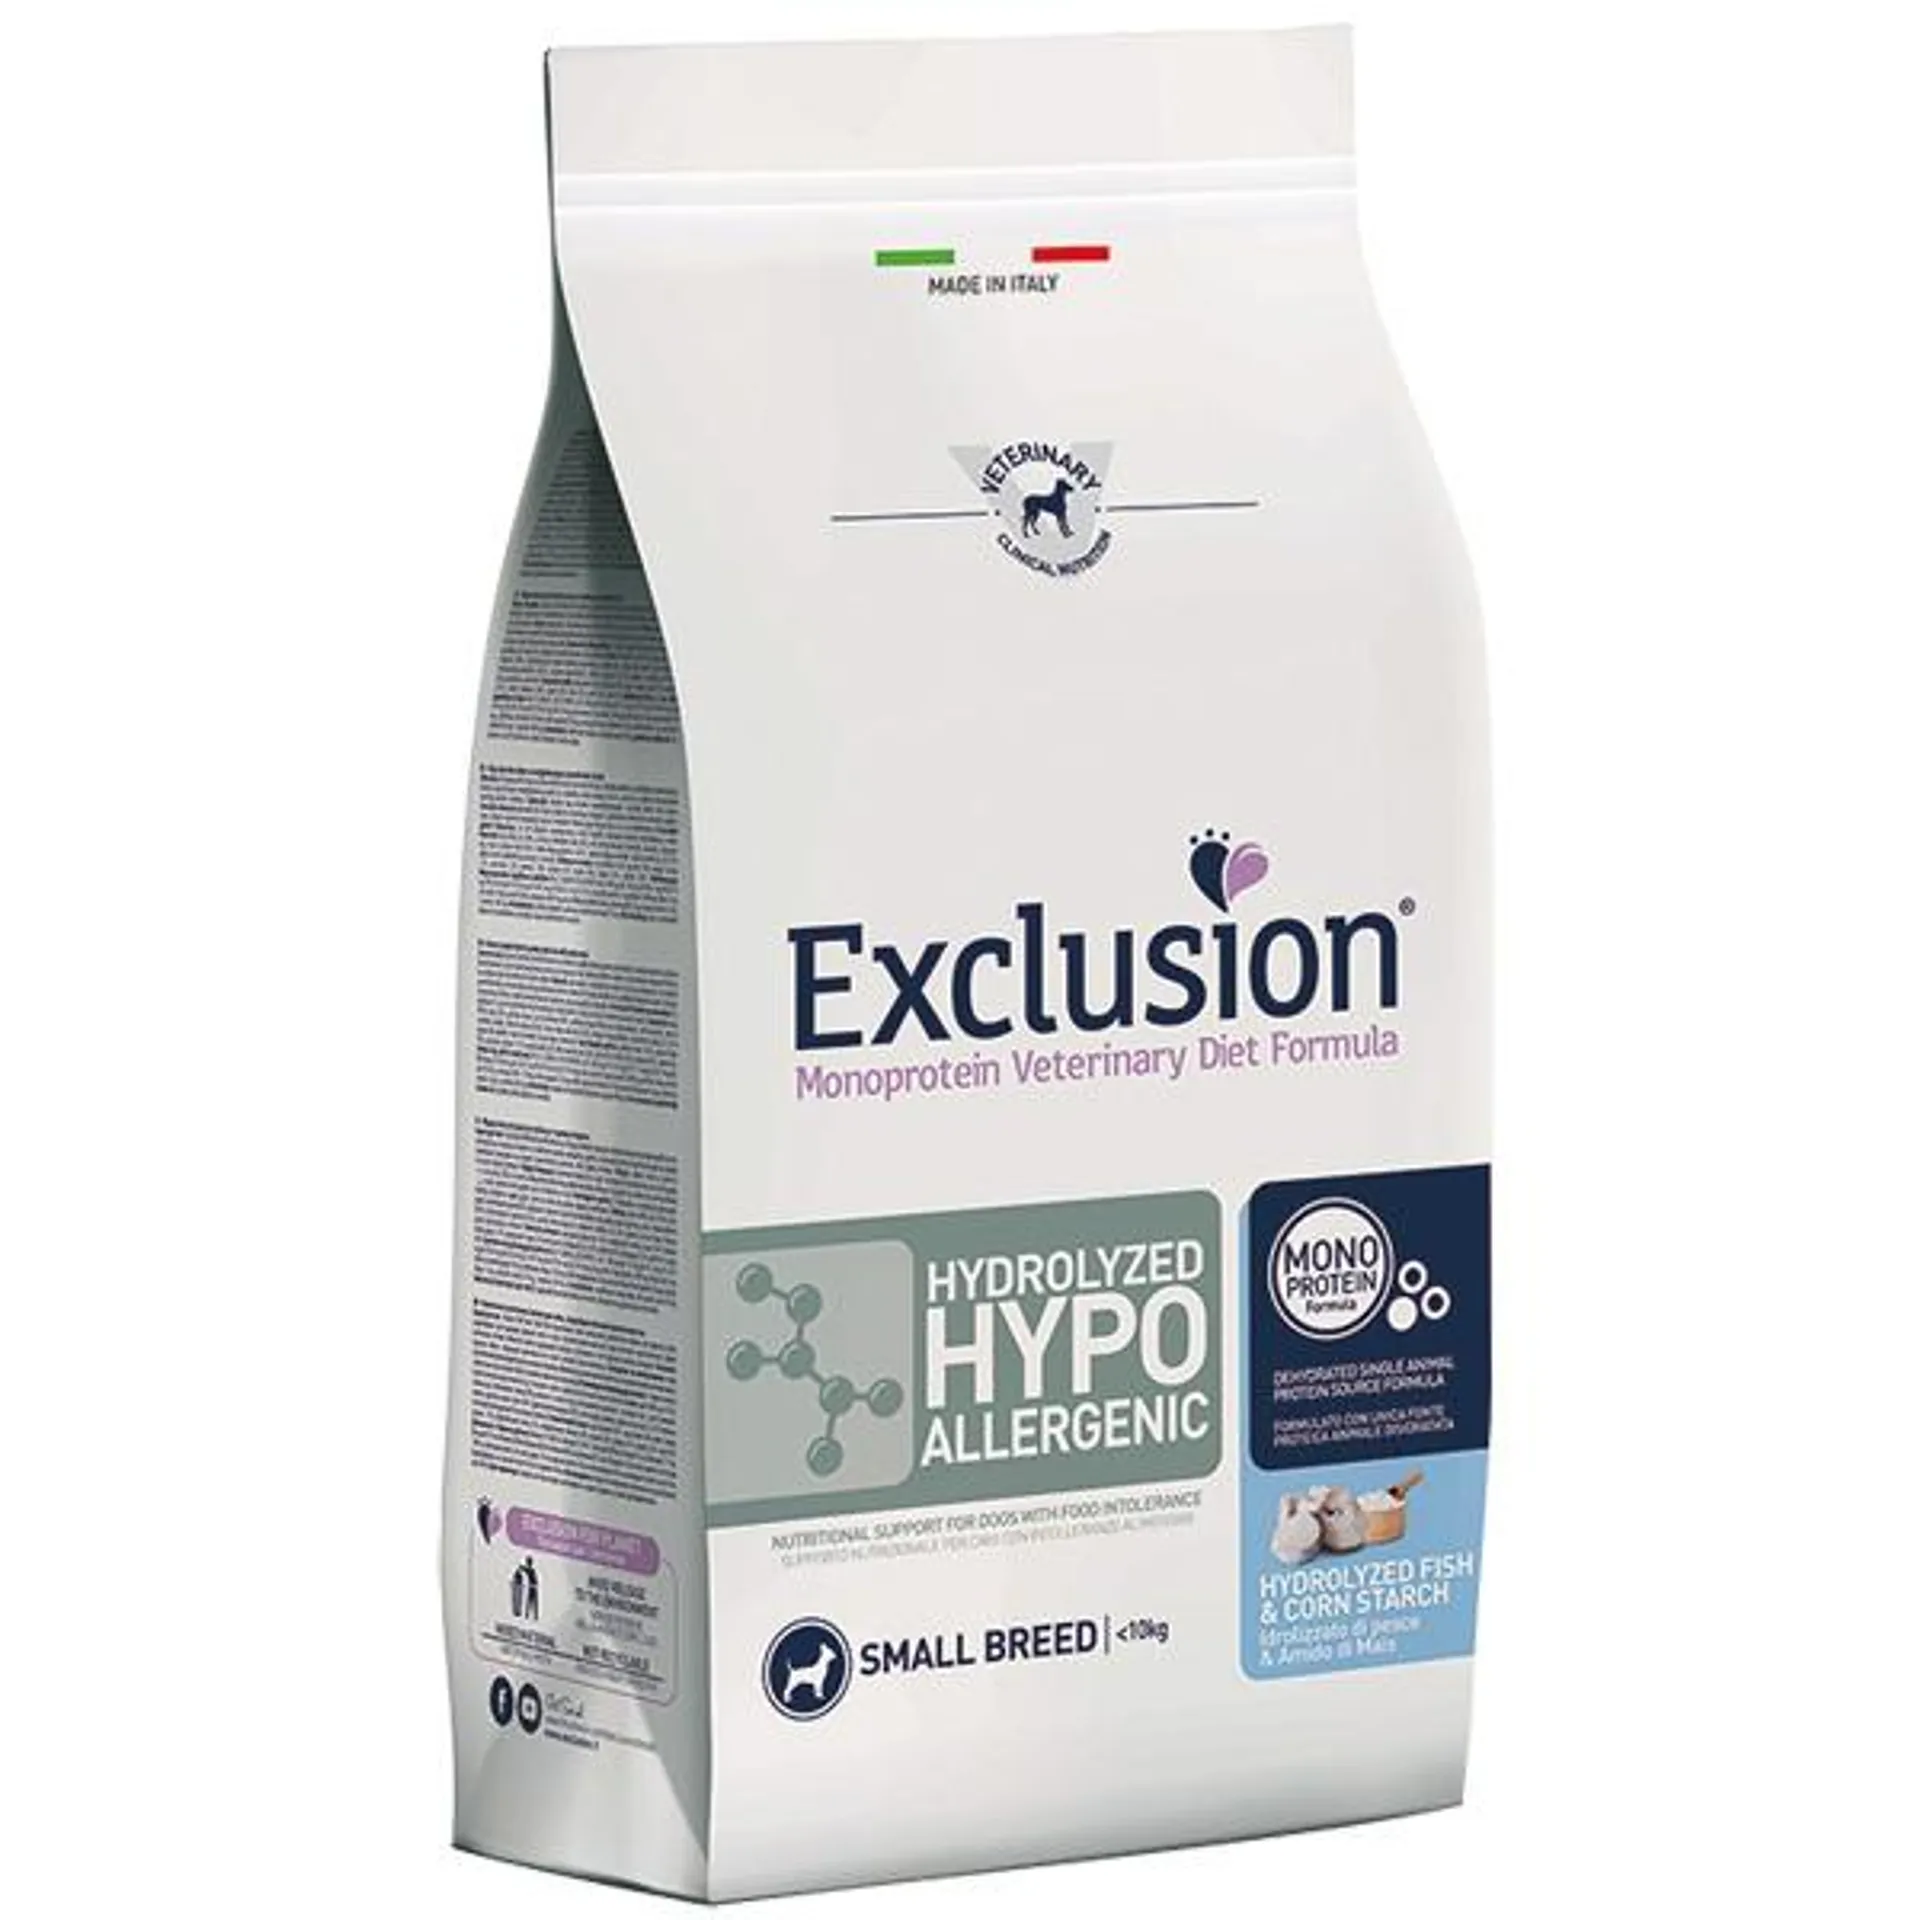 Exclusion - Diet Hydrolyzed Hypoallergenic Small Breed